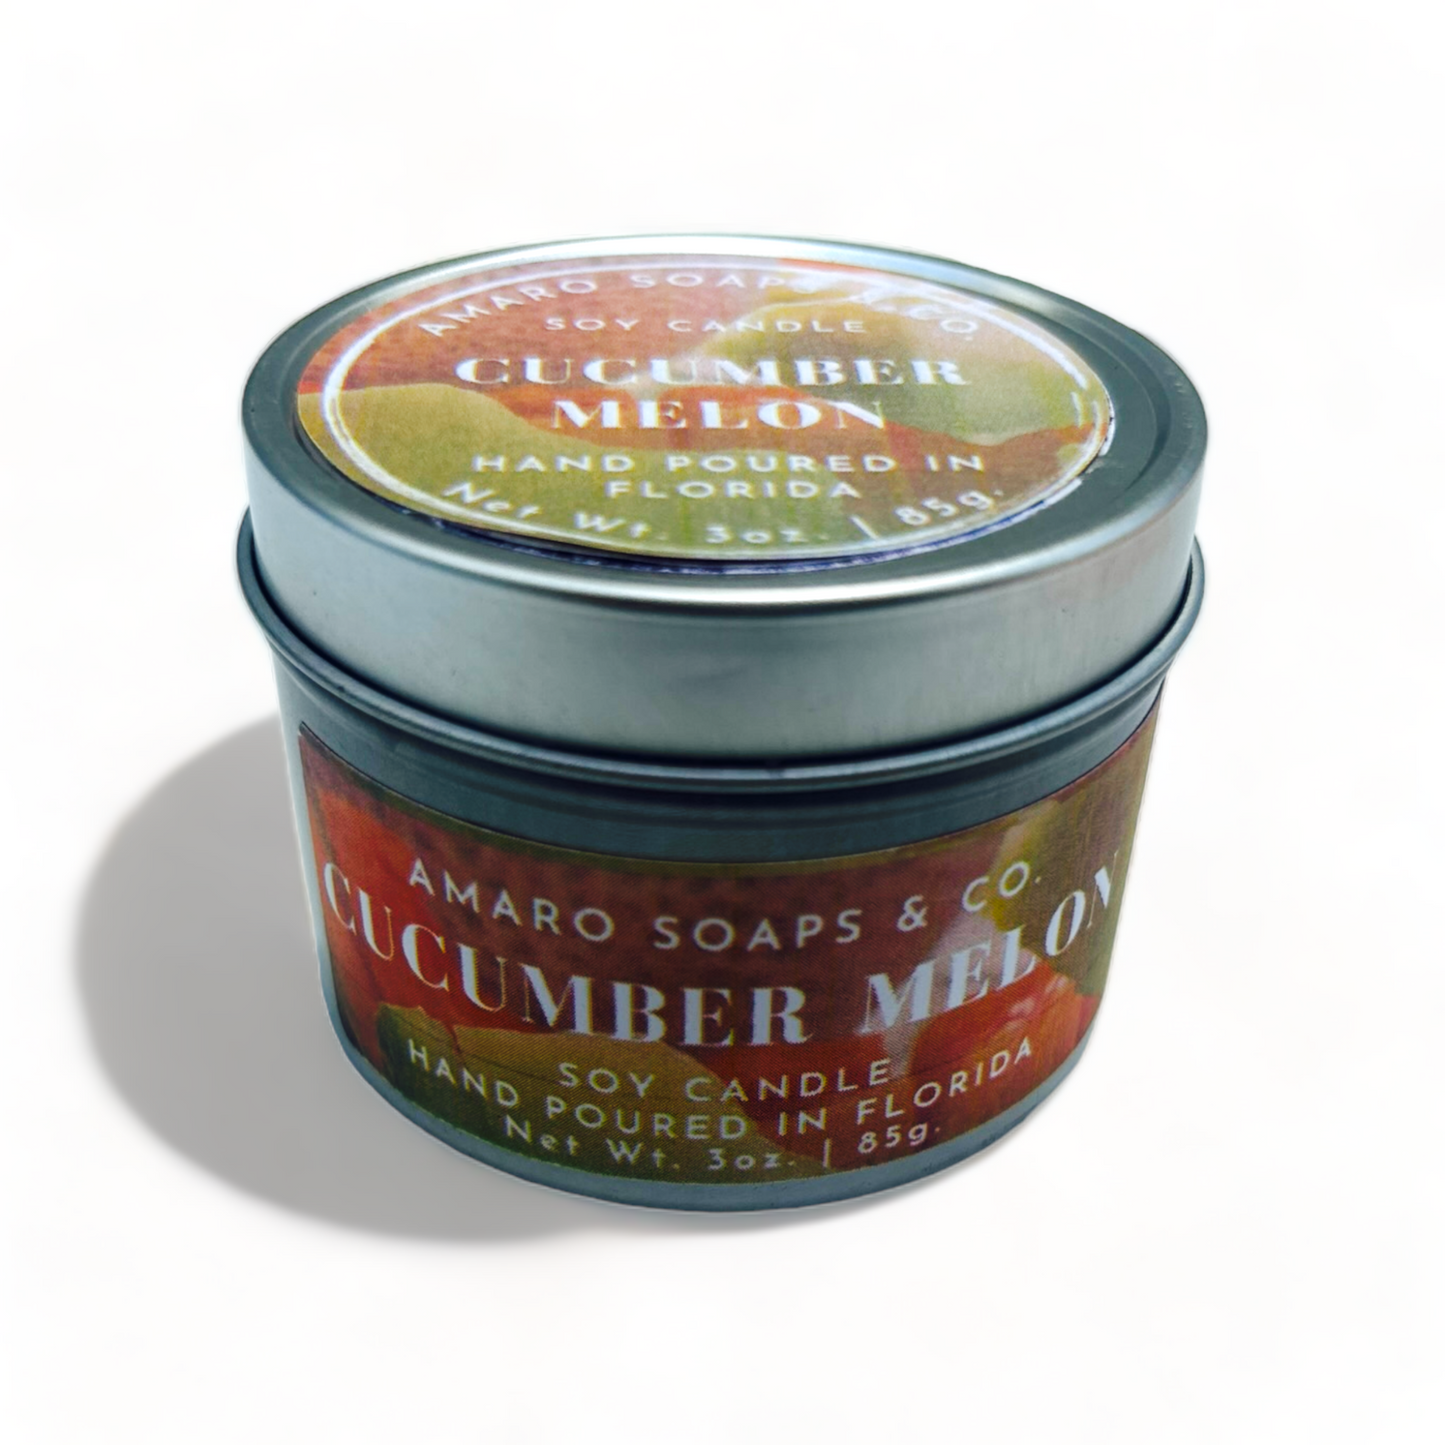 Cucumber Melon Soy Candle Tin